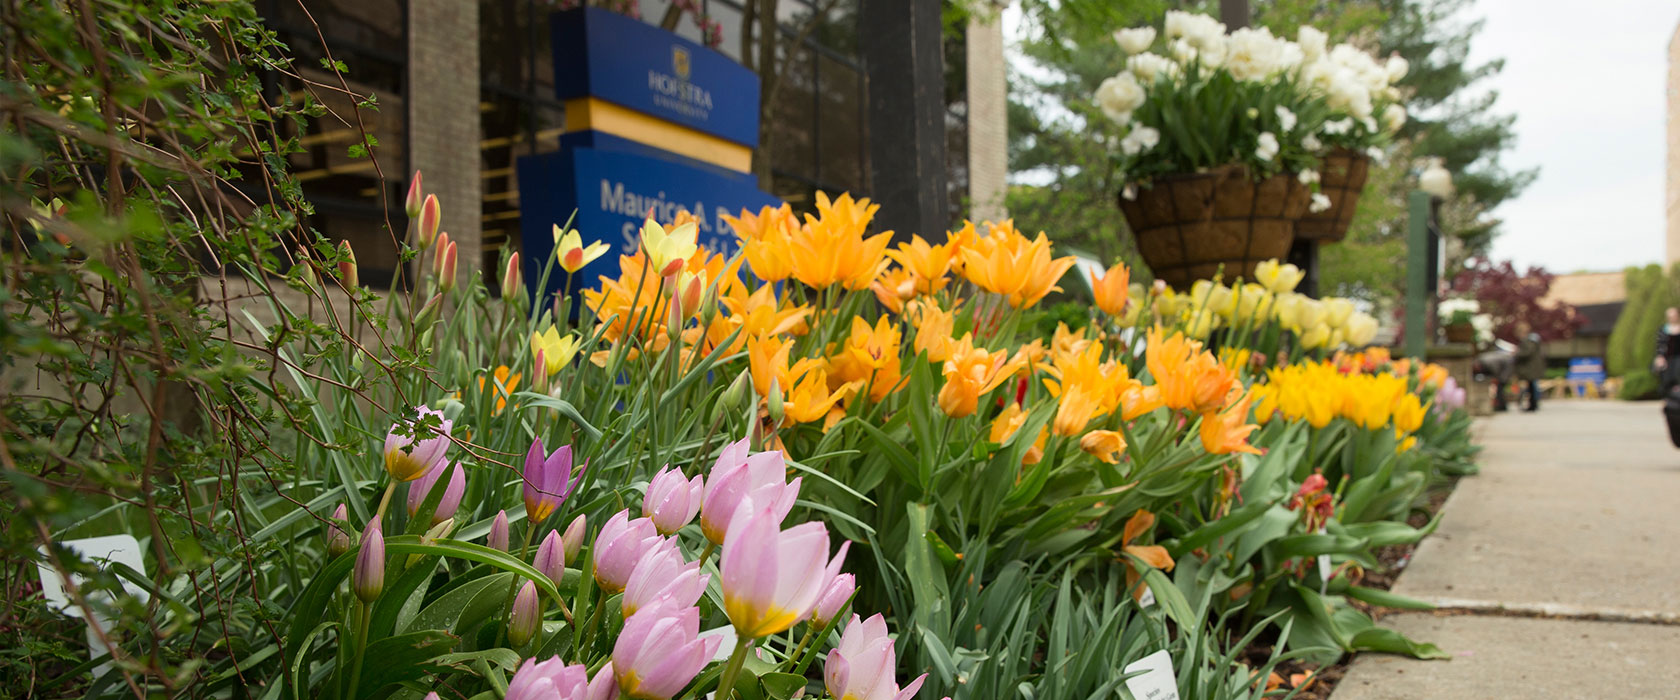 Hofstra Law Tour - See Flowers in bloom on campus